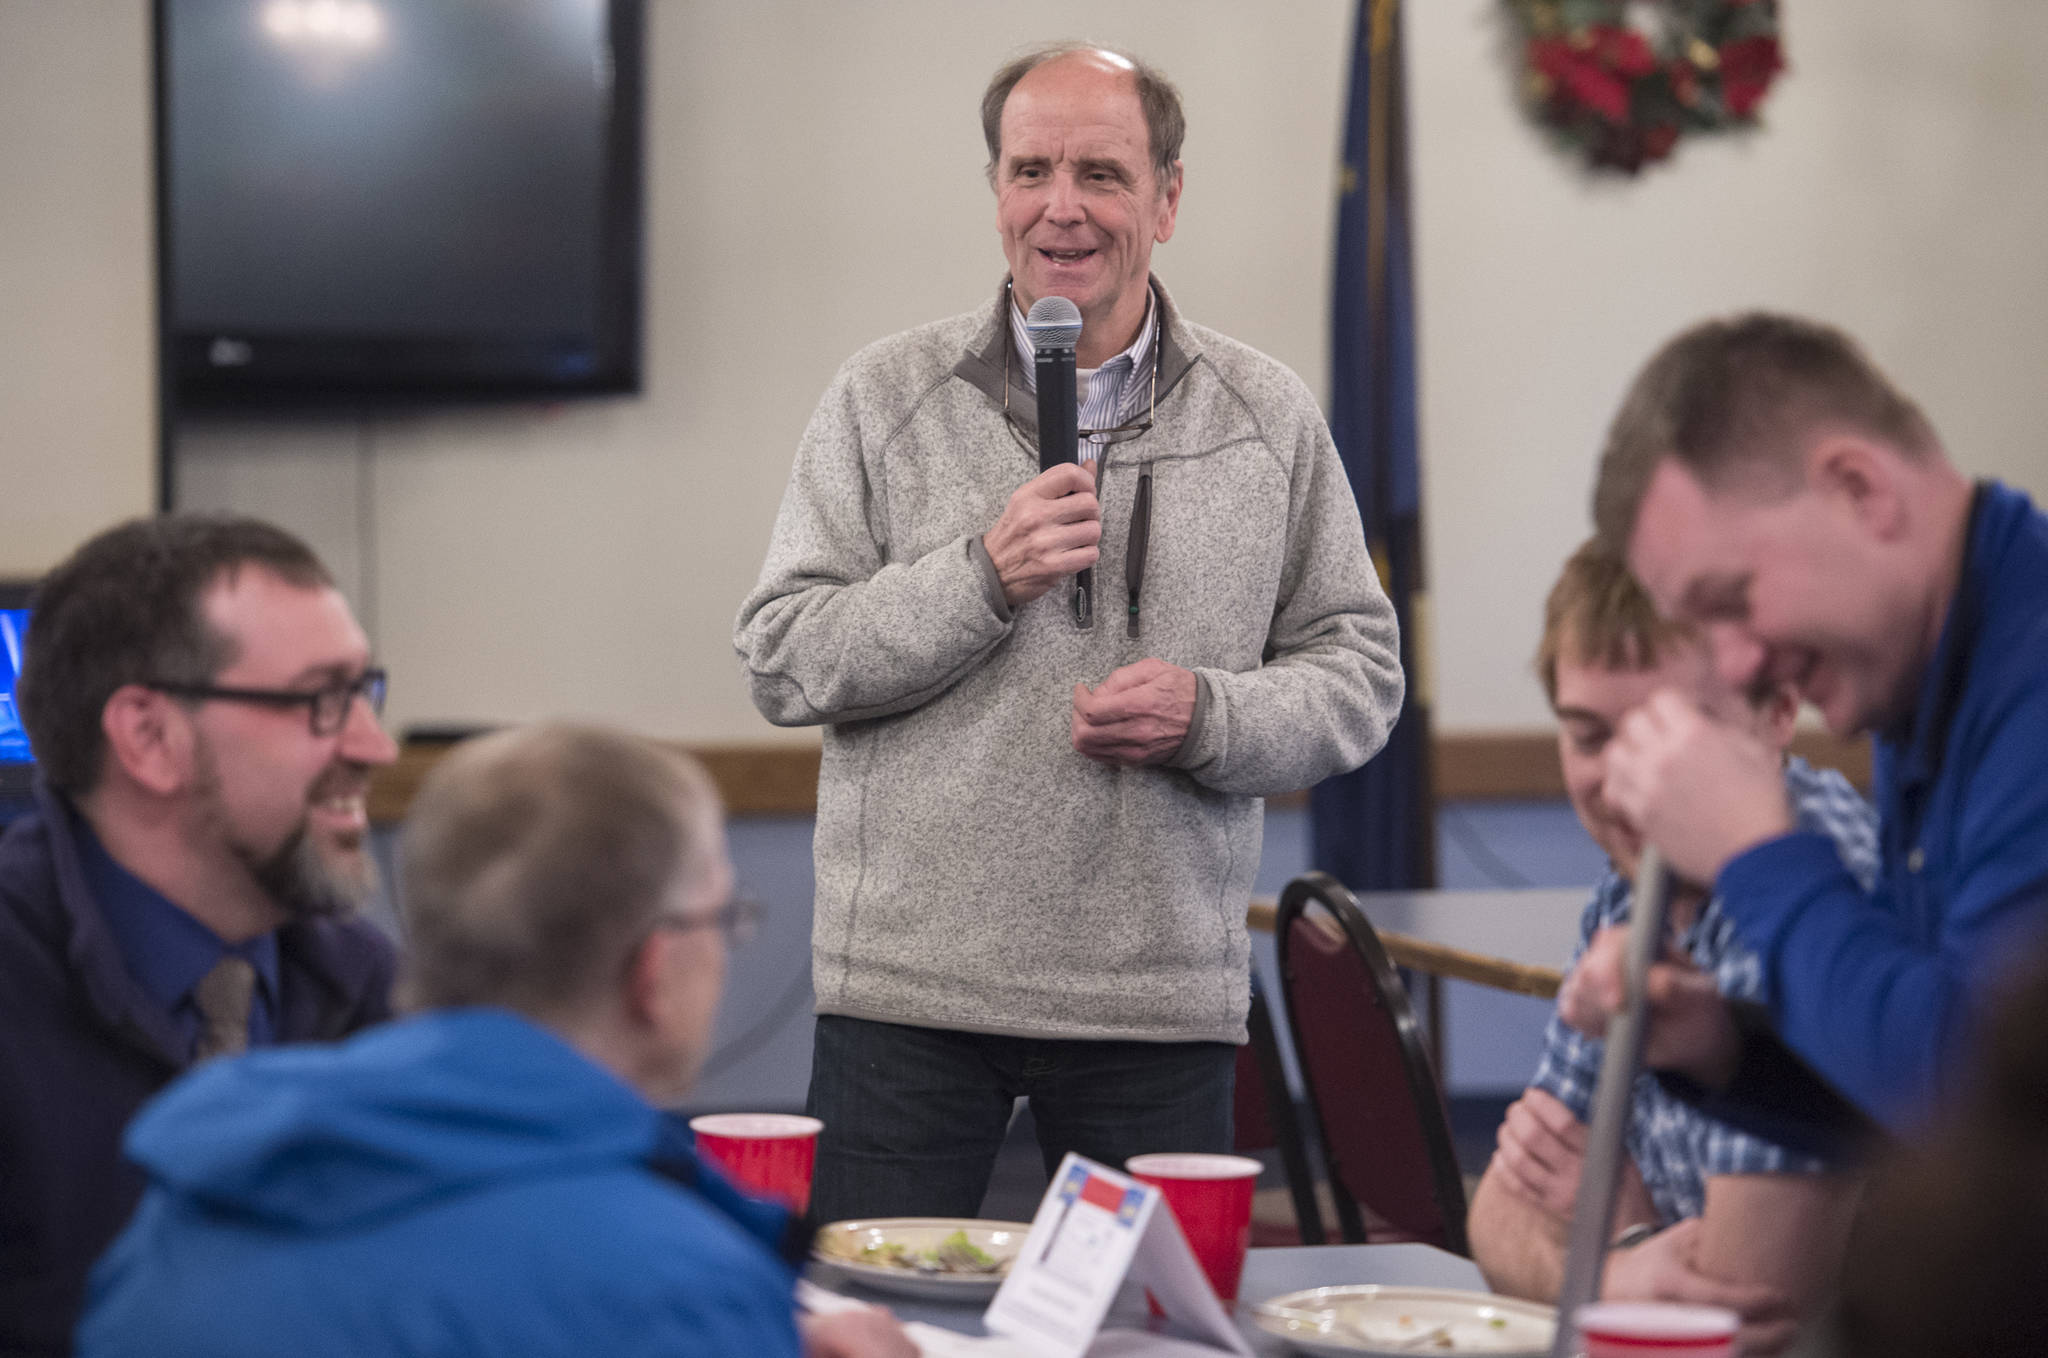 Bruce Denton watches members of the Juneau Chamber of Commerce experiment with magnets for his talk about the middle school physics program ”See the Change” at the Moose Lodge on Thursday, Dec. 14, 2017. (Michael Penn | Juneau Empire)